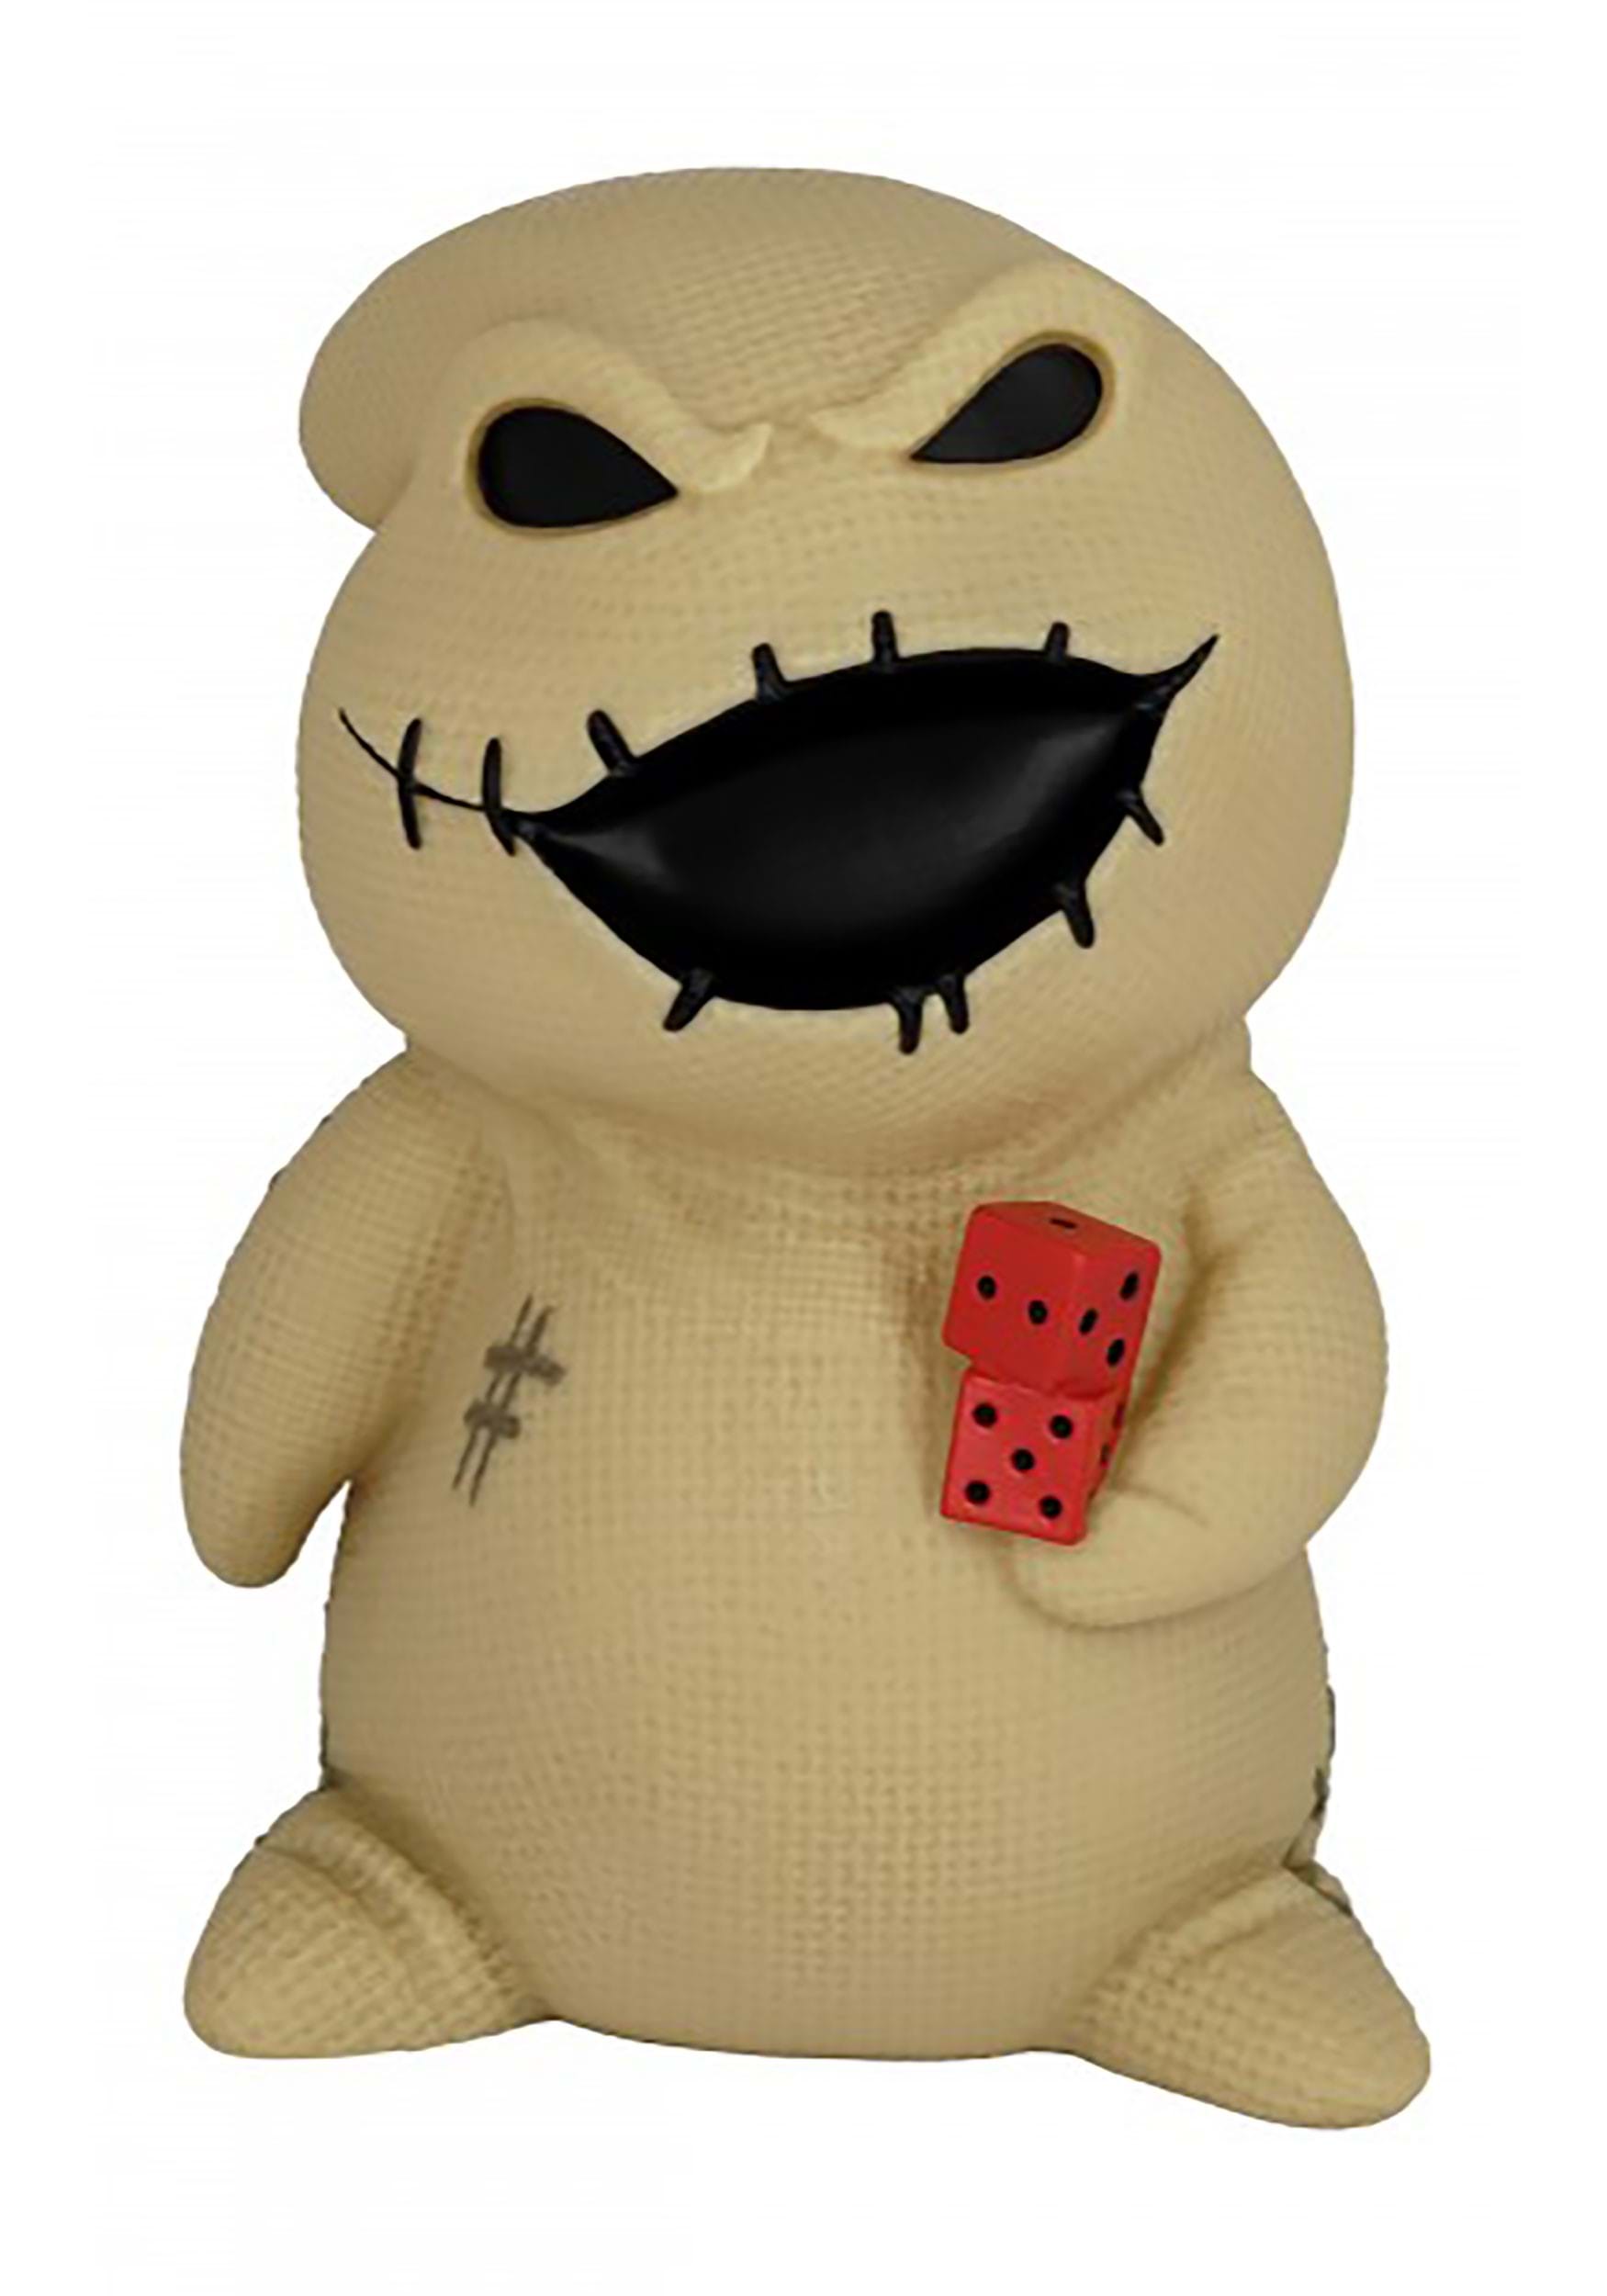 Oogie Boogie Nightmare Before Christmas Coin Bank